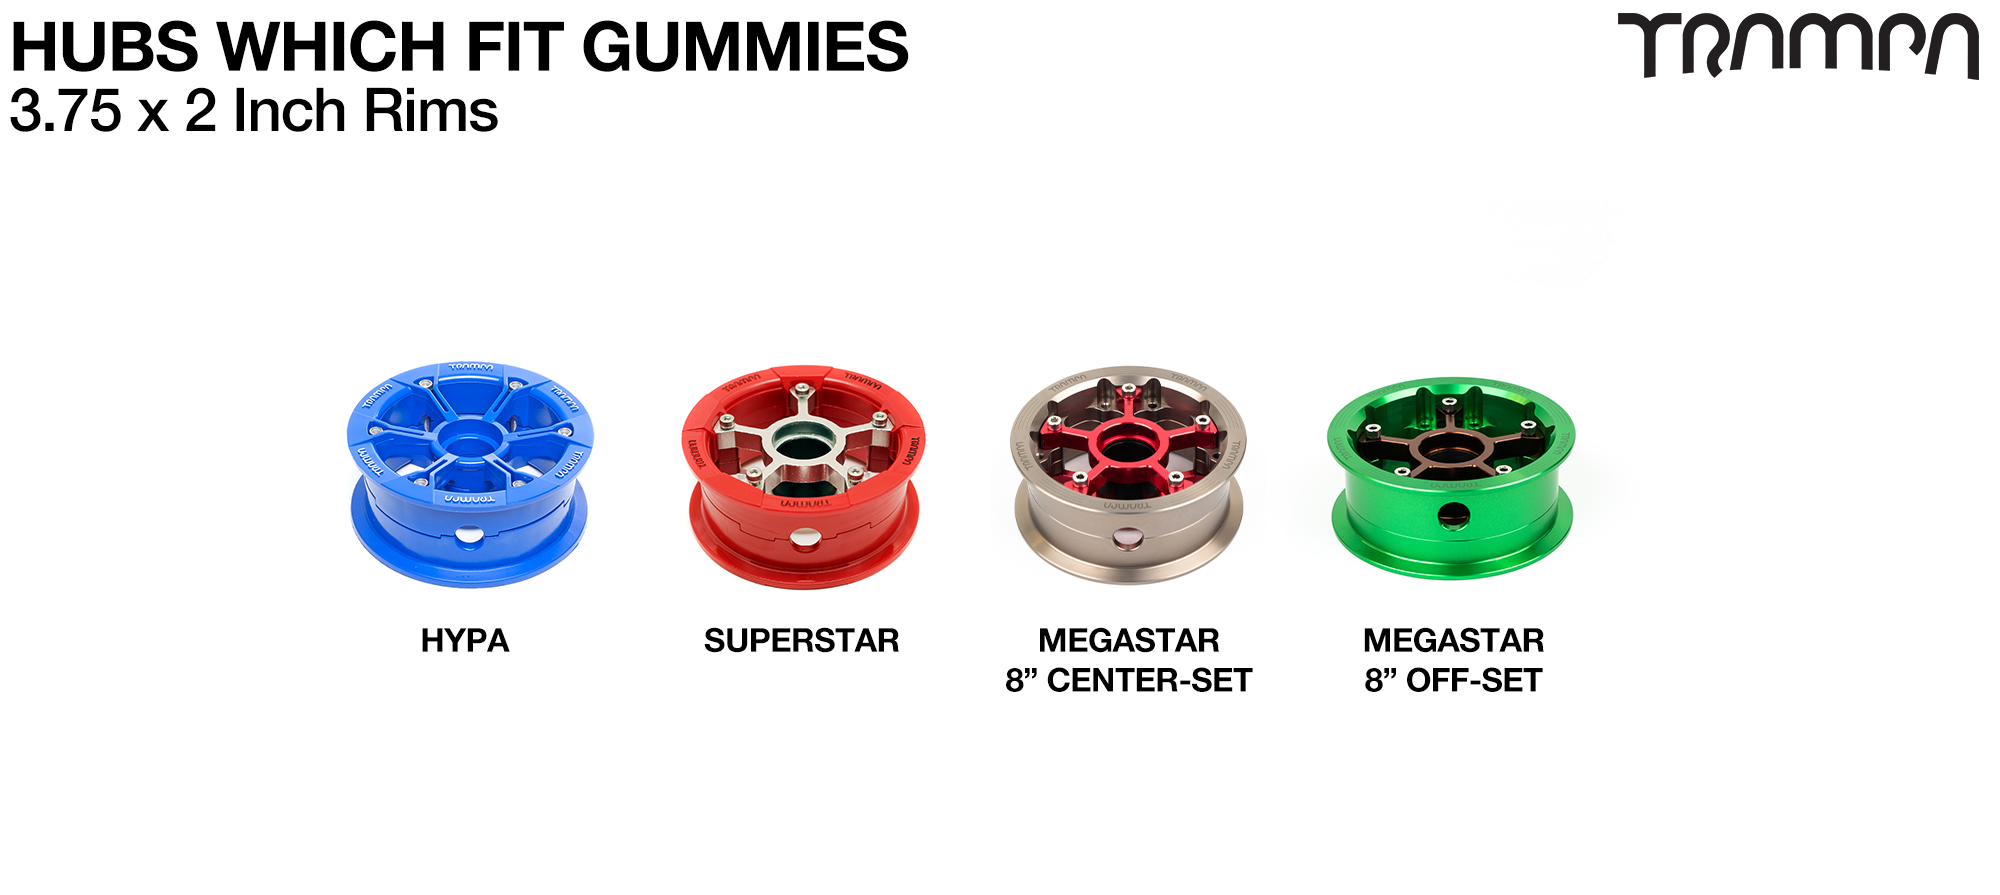 GUMMIES 5 Inch Tyre - The Worlds largest Longboard wheel fixes to Any of the TRAMPA HYPA, SUPERSTAR & 8 Inch MEGASTAR Hubs